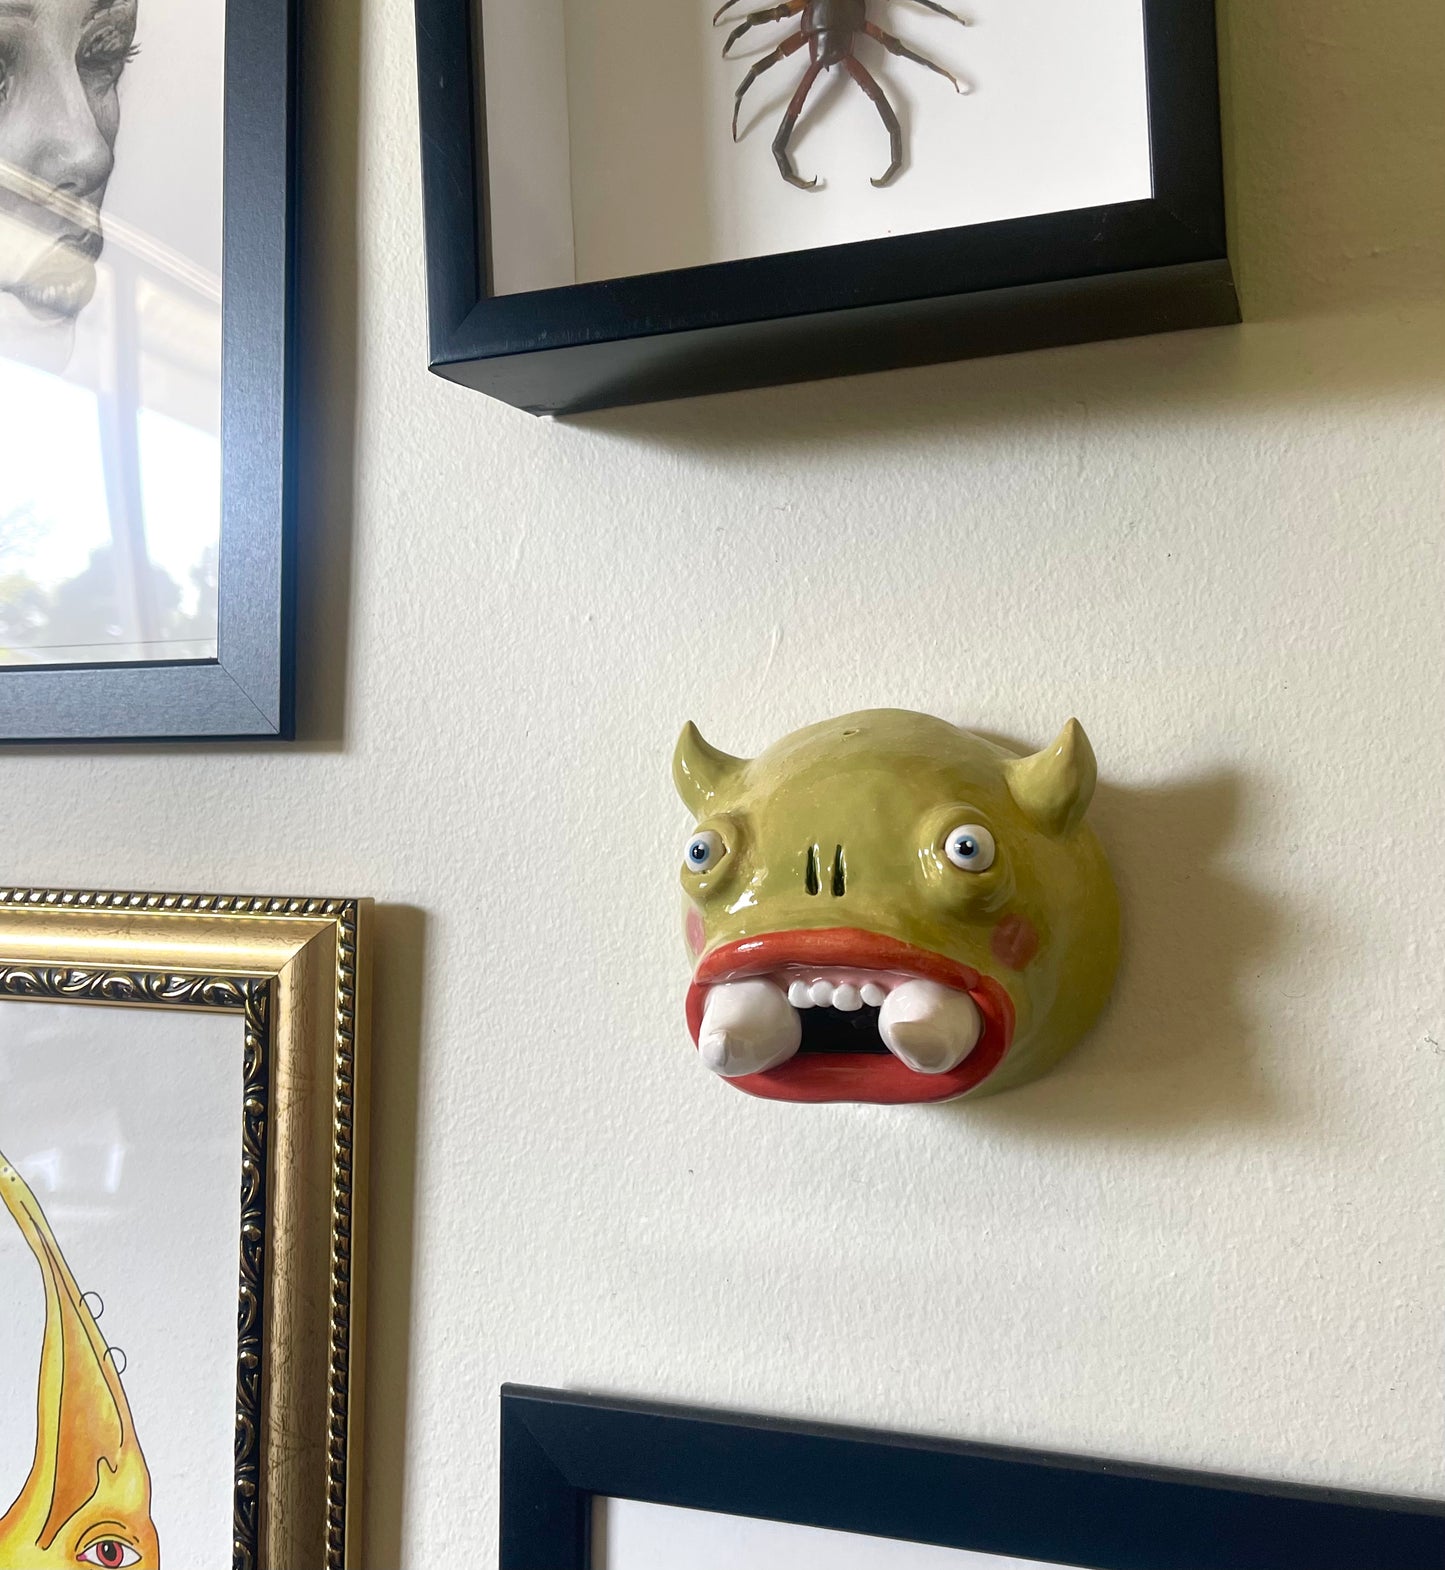 Tim the Wall Hanging Gobby